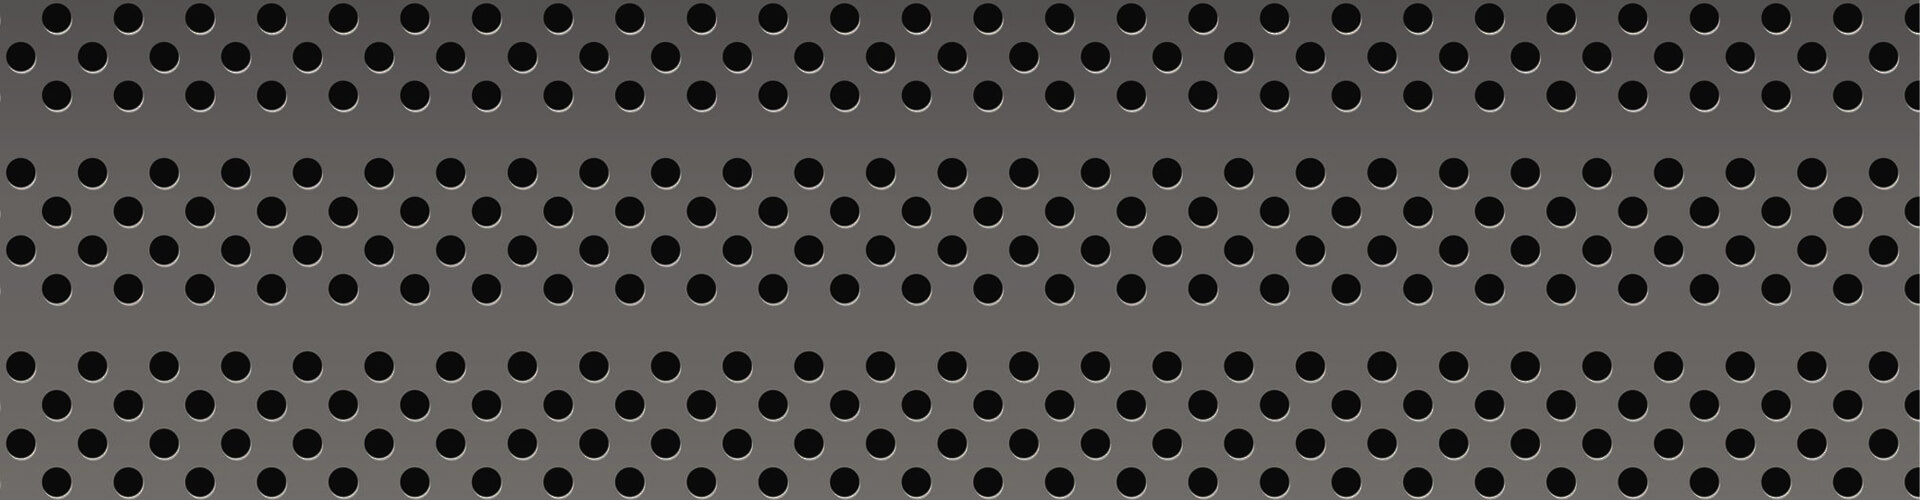 8mm Perforated Sheets factory supplier manufacturer china